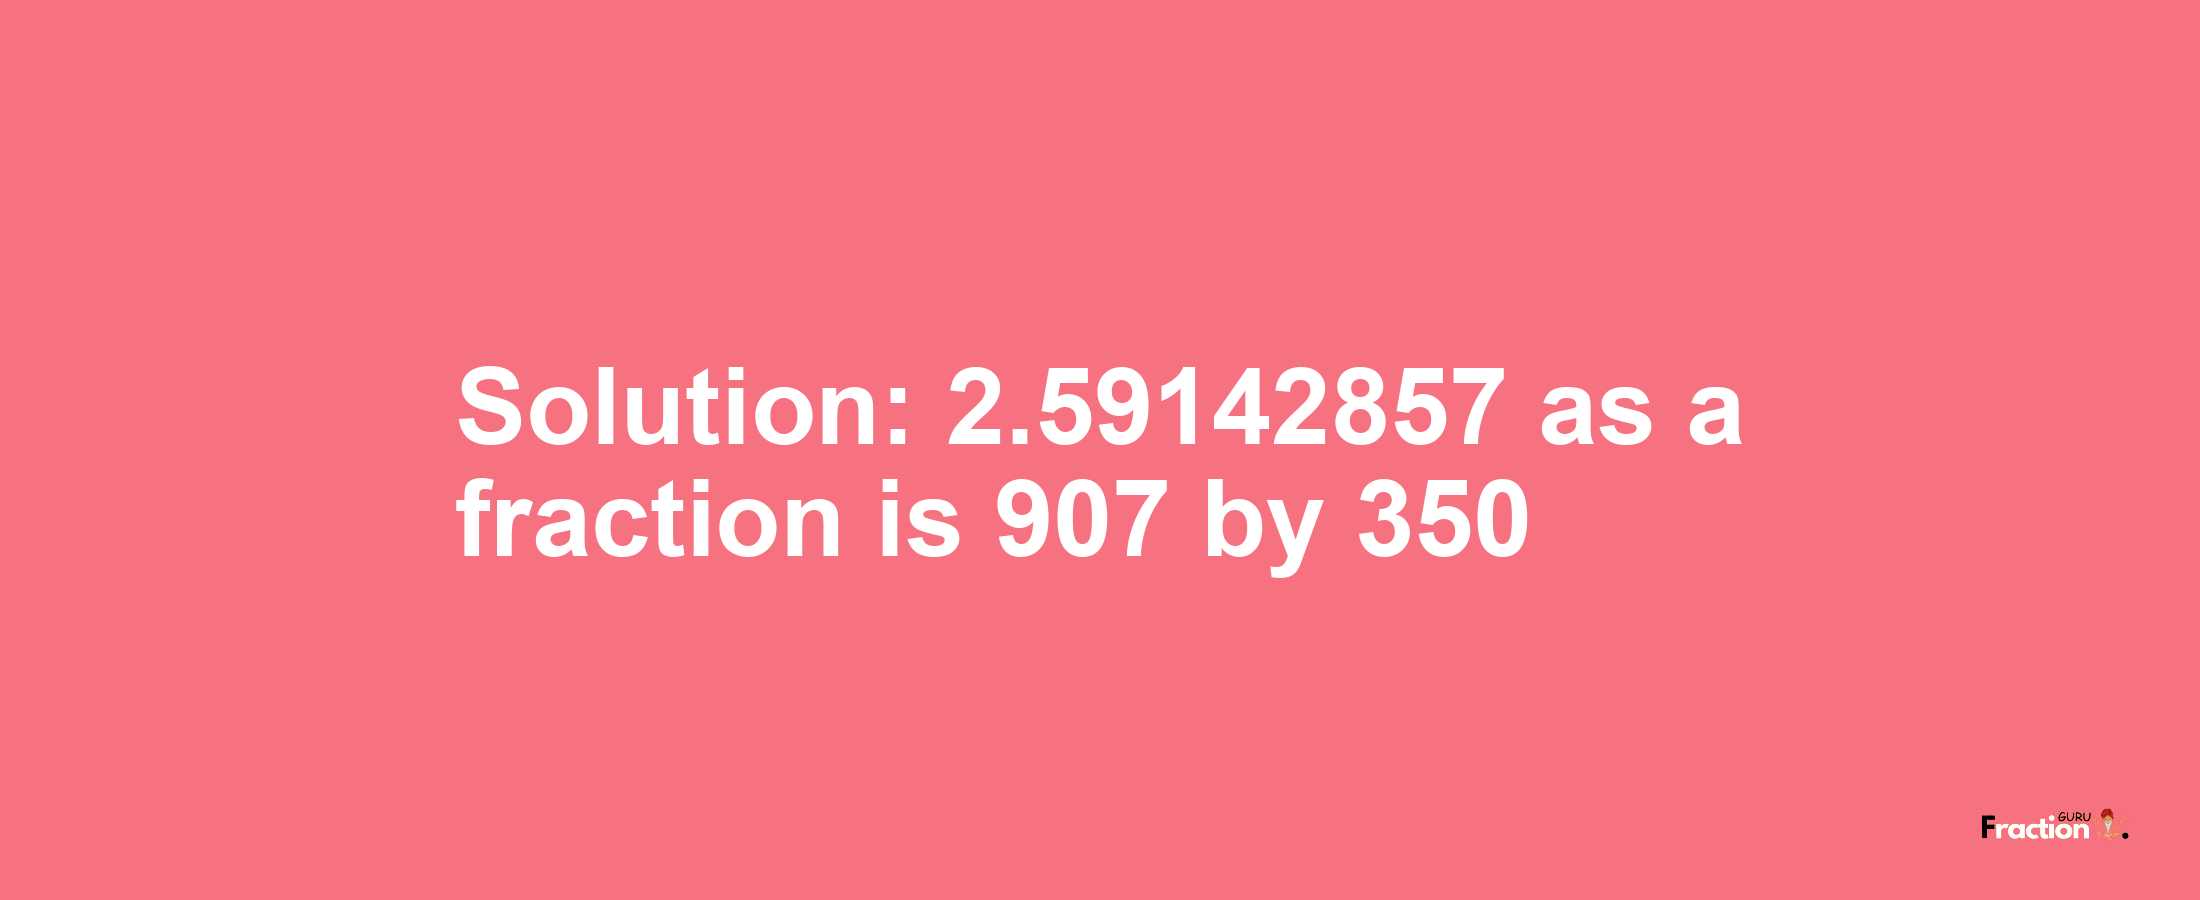 Solution:2.59142857 as a fraction is 907/350